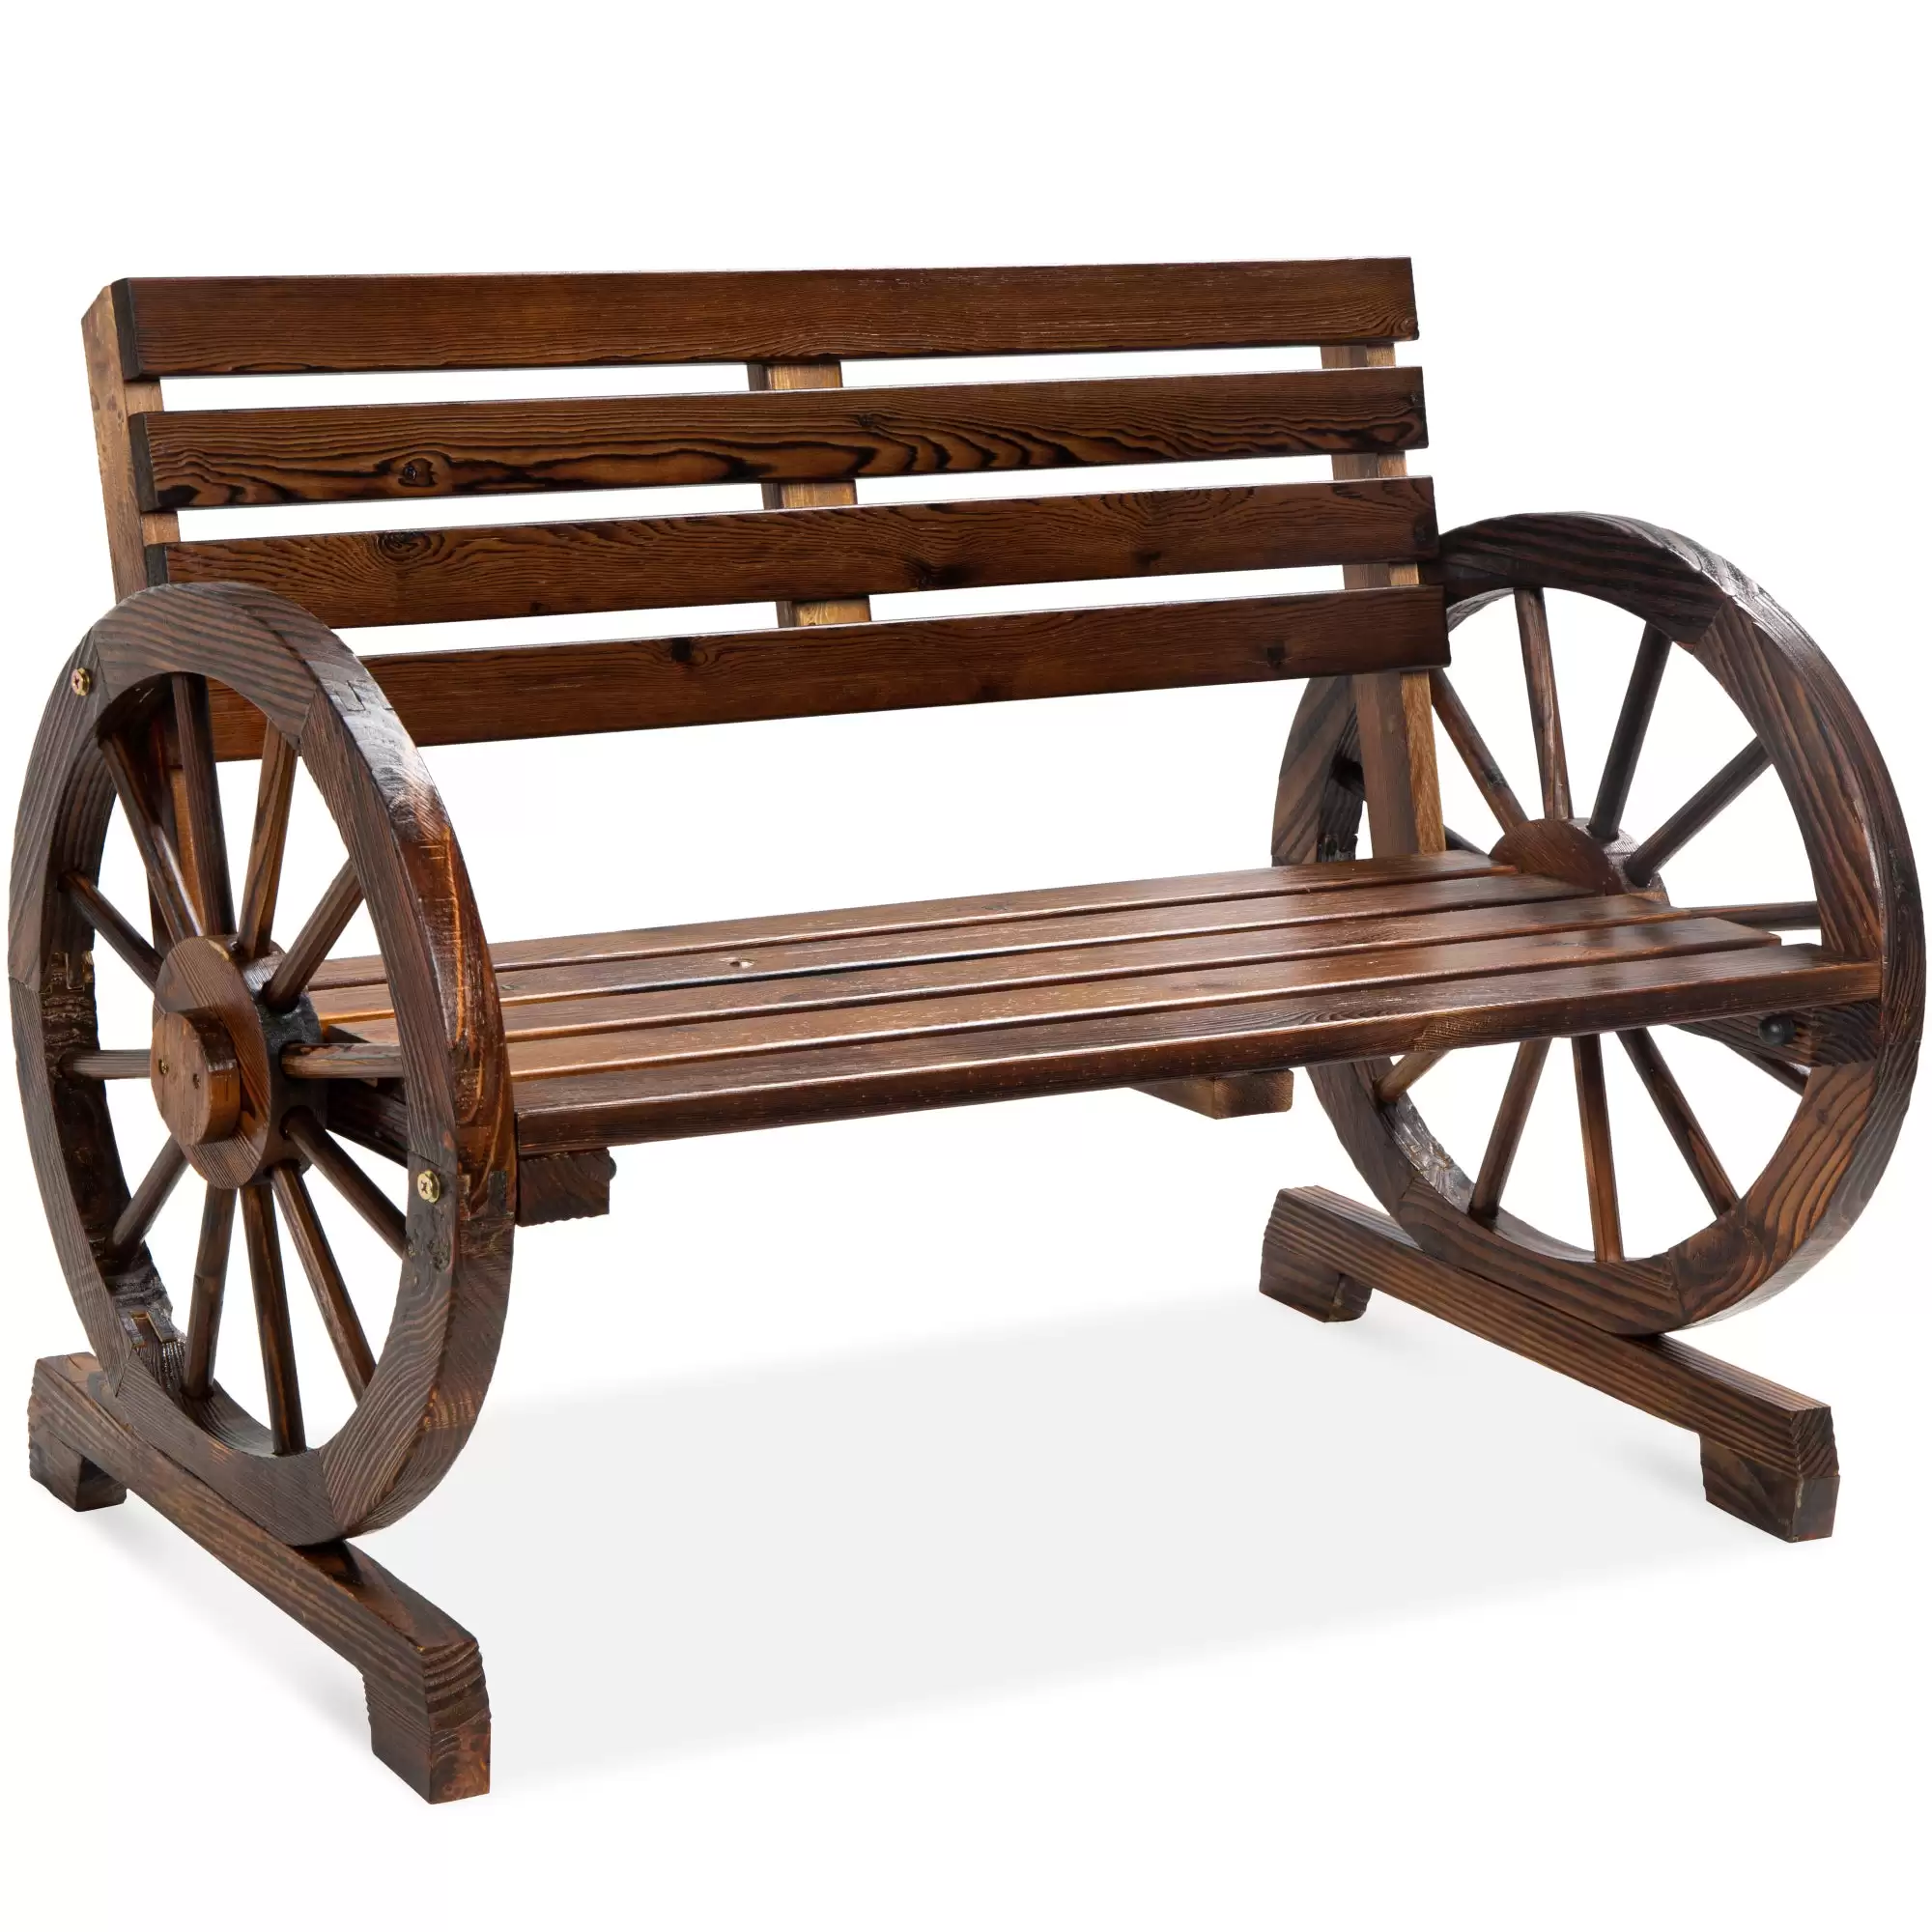 Spend $99.99 2-Person Rustic Wooden Wagon Wheel Bench W/ Slatted Seat And Backrest At Bestchoiceproducts